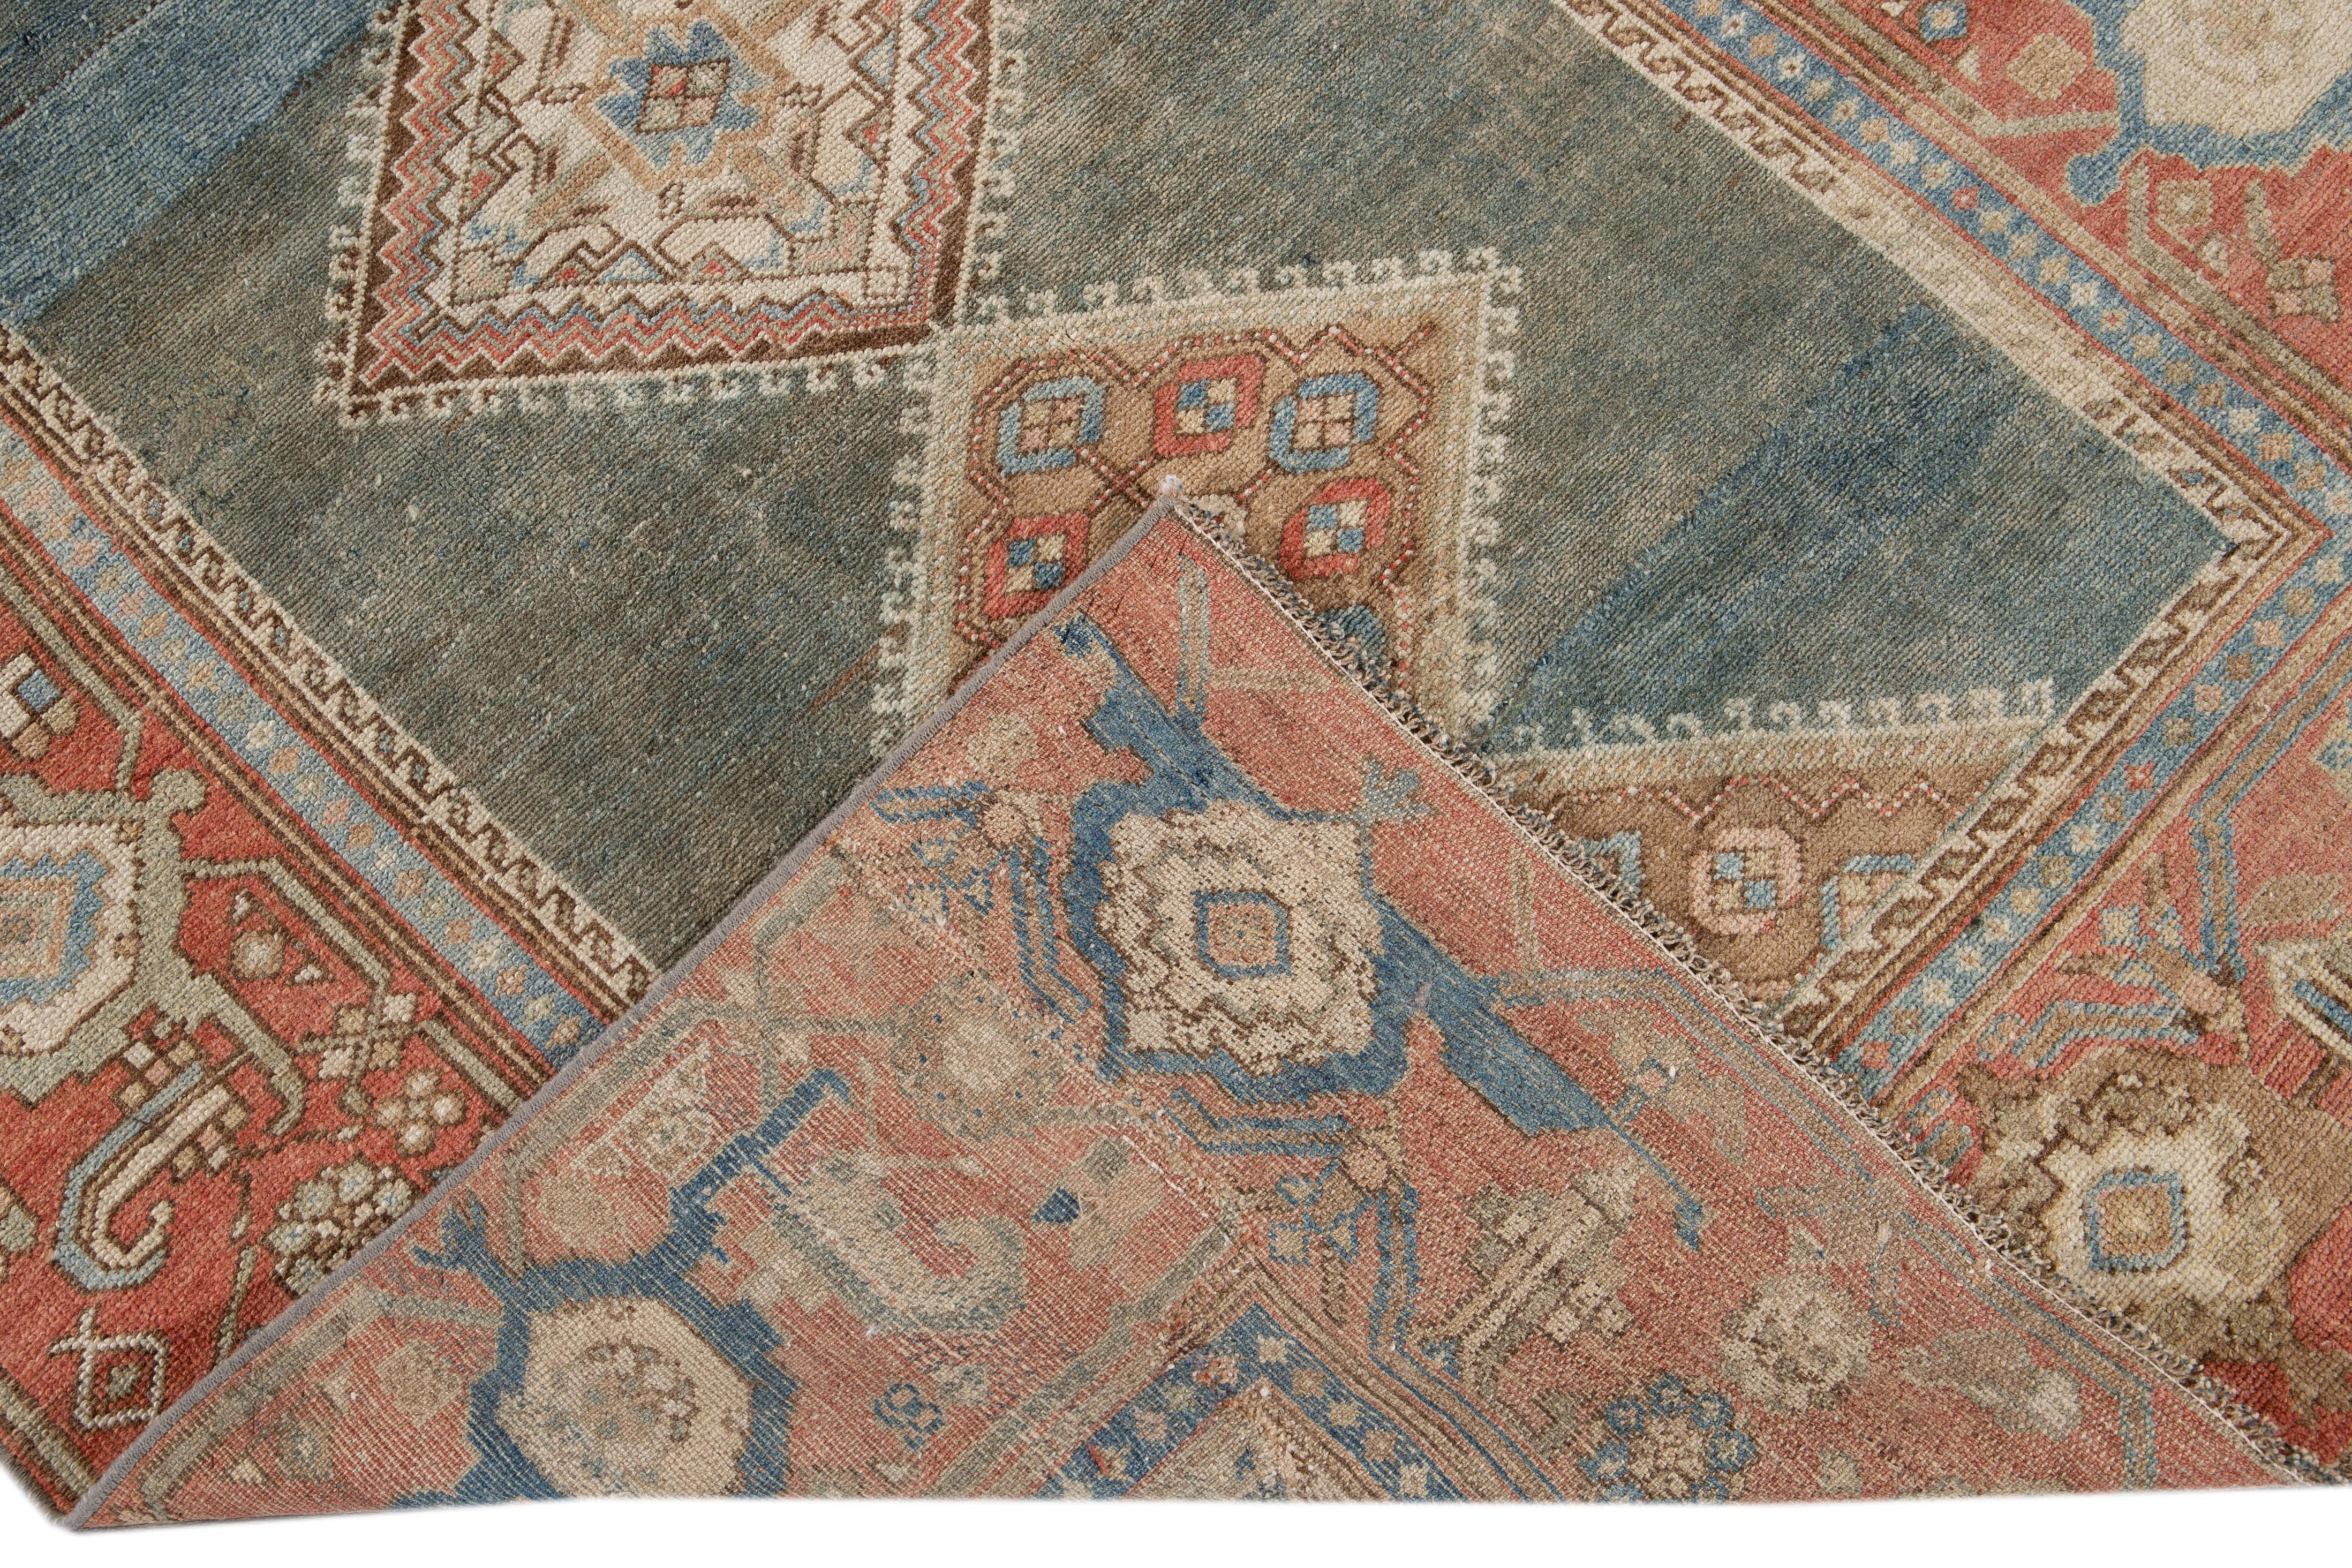 Beautiful antique Malayer hand knotted wool runner with a blue field. This Malayer rug has a rust frame and accents of beige, ivory, and peach in an all-over gorgeous geometric floral design.

This rug measures: 4'1